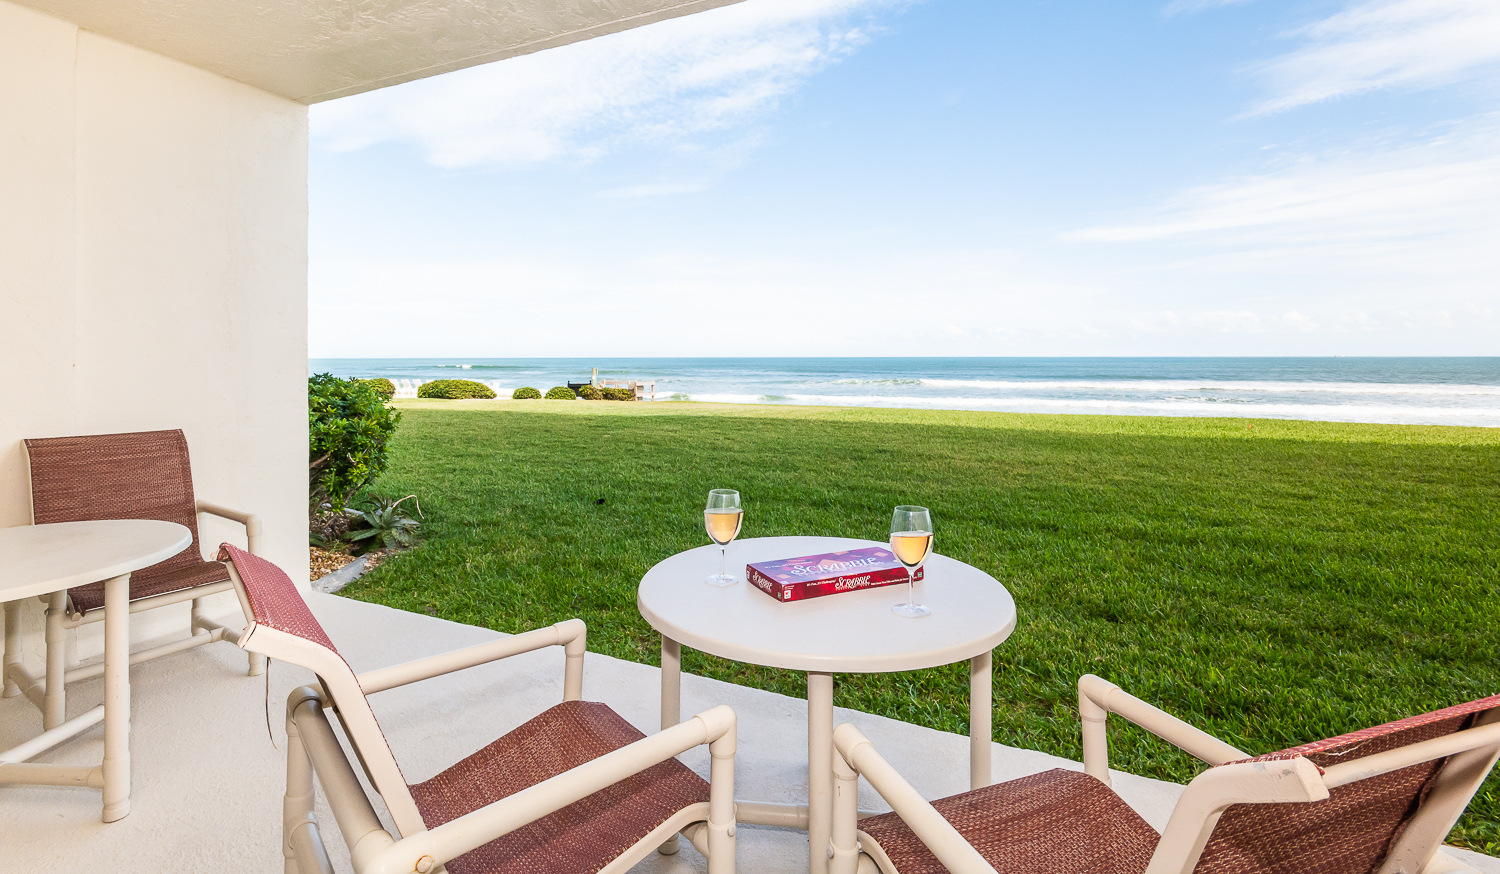 Oceanfront patio in our oceanfront rental New Smyrna Beach Florida